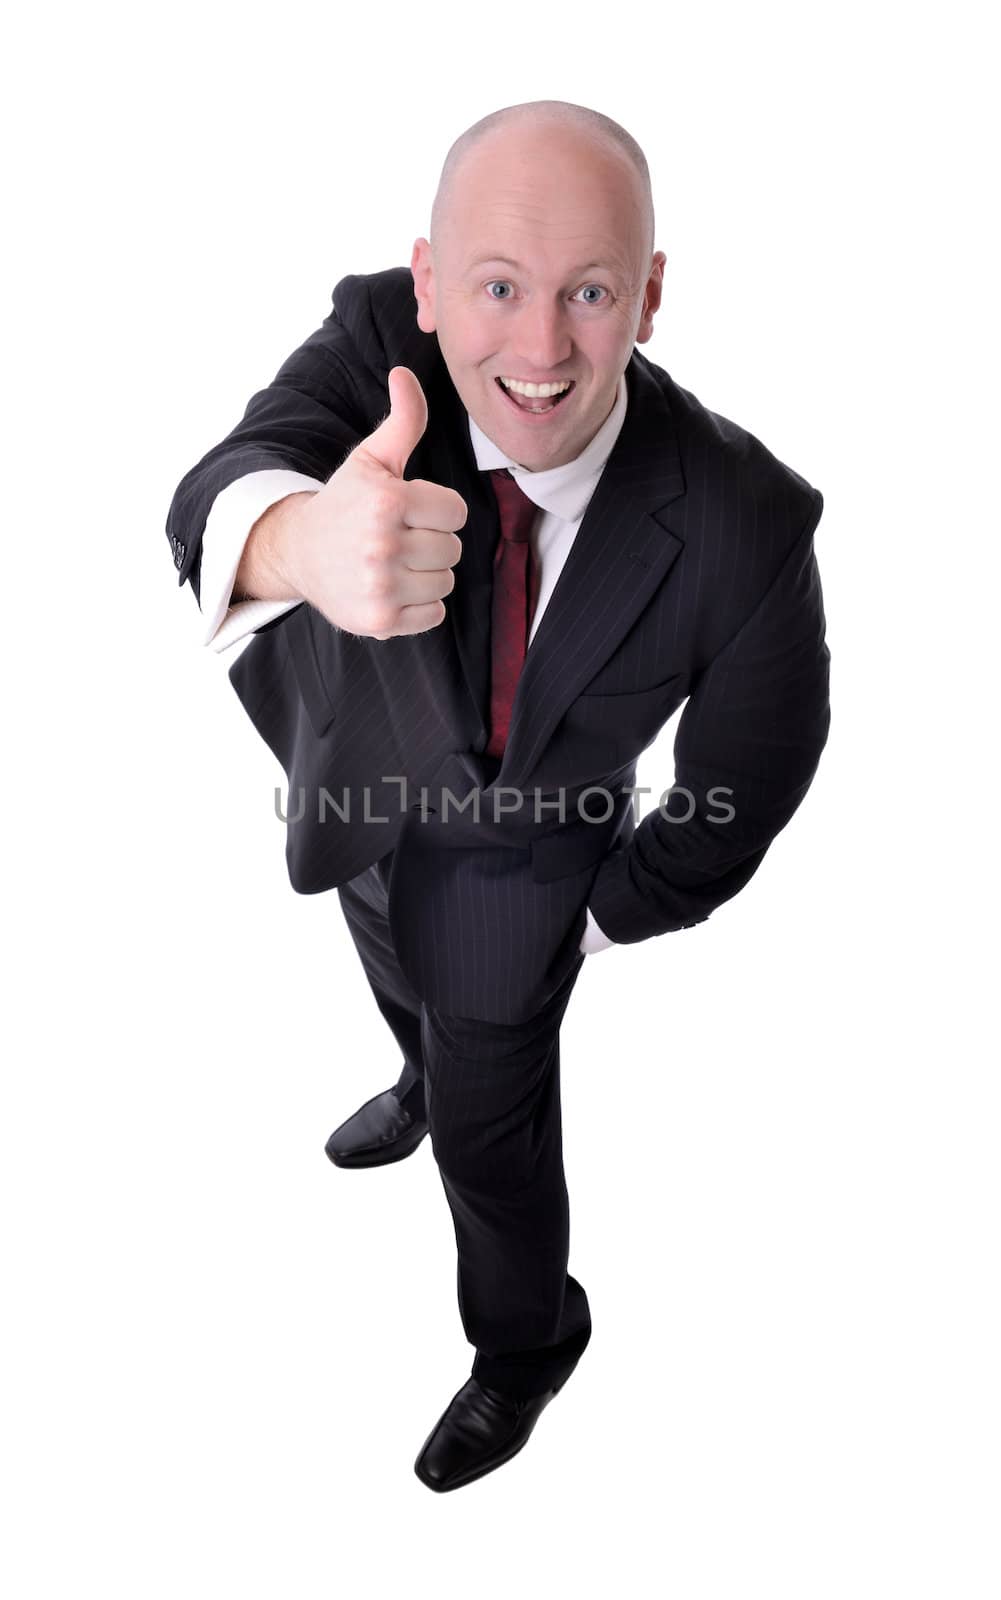 thumbs up from a businessman viewd from above